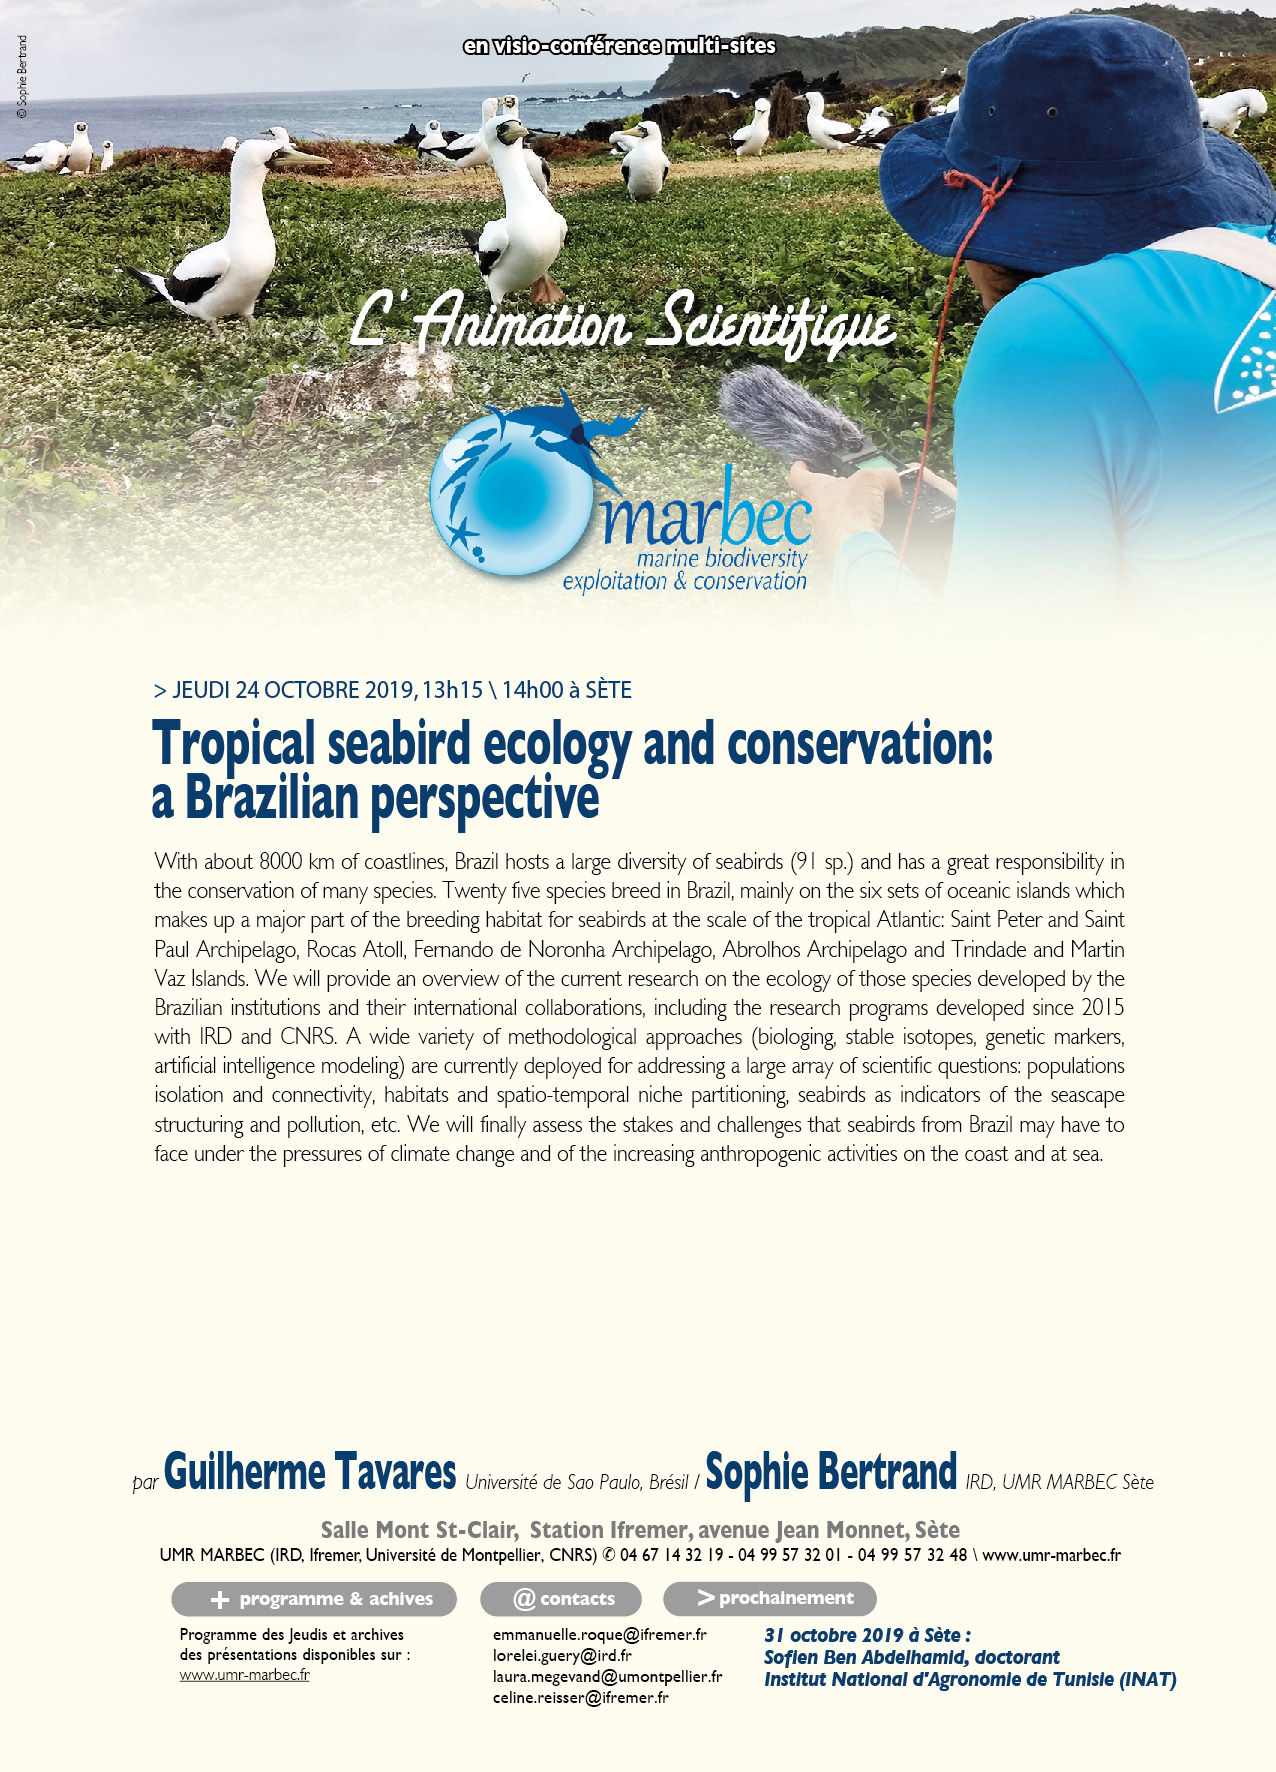 Tropical seabird ecology and conservation: a Brazilian perspective